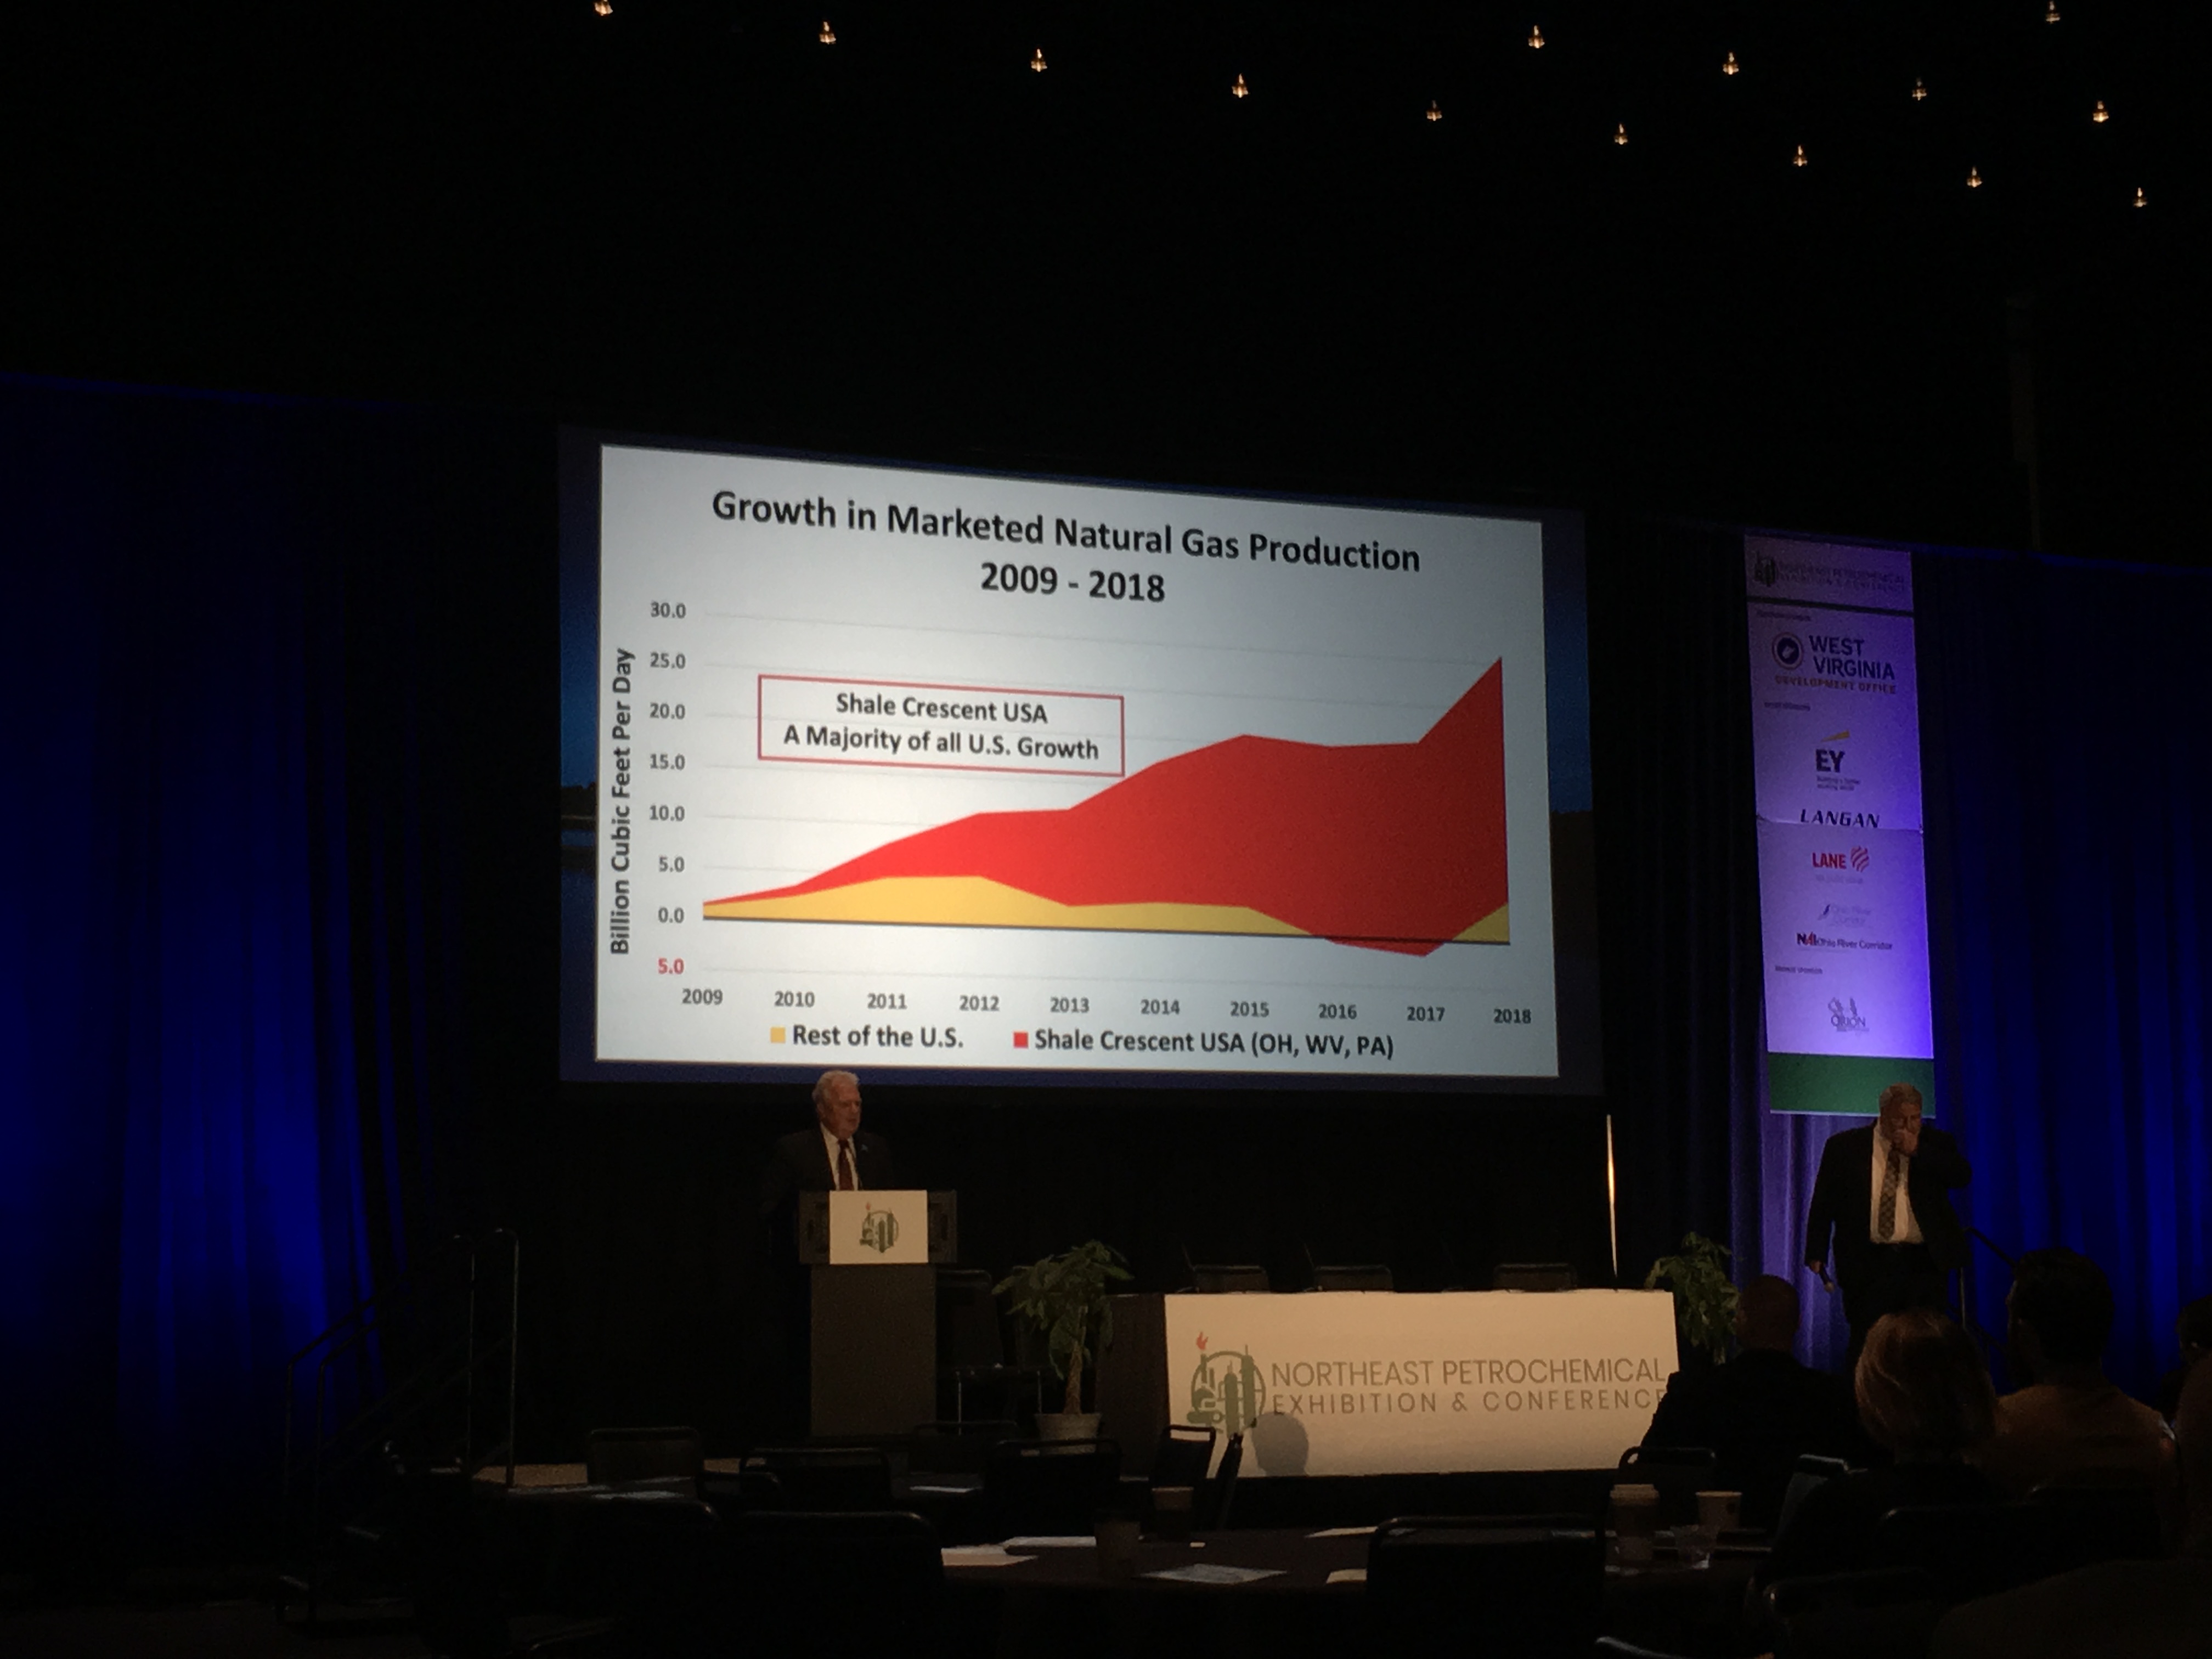 Presentation slide showing growth in marketed natural gas production 2009-2018